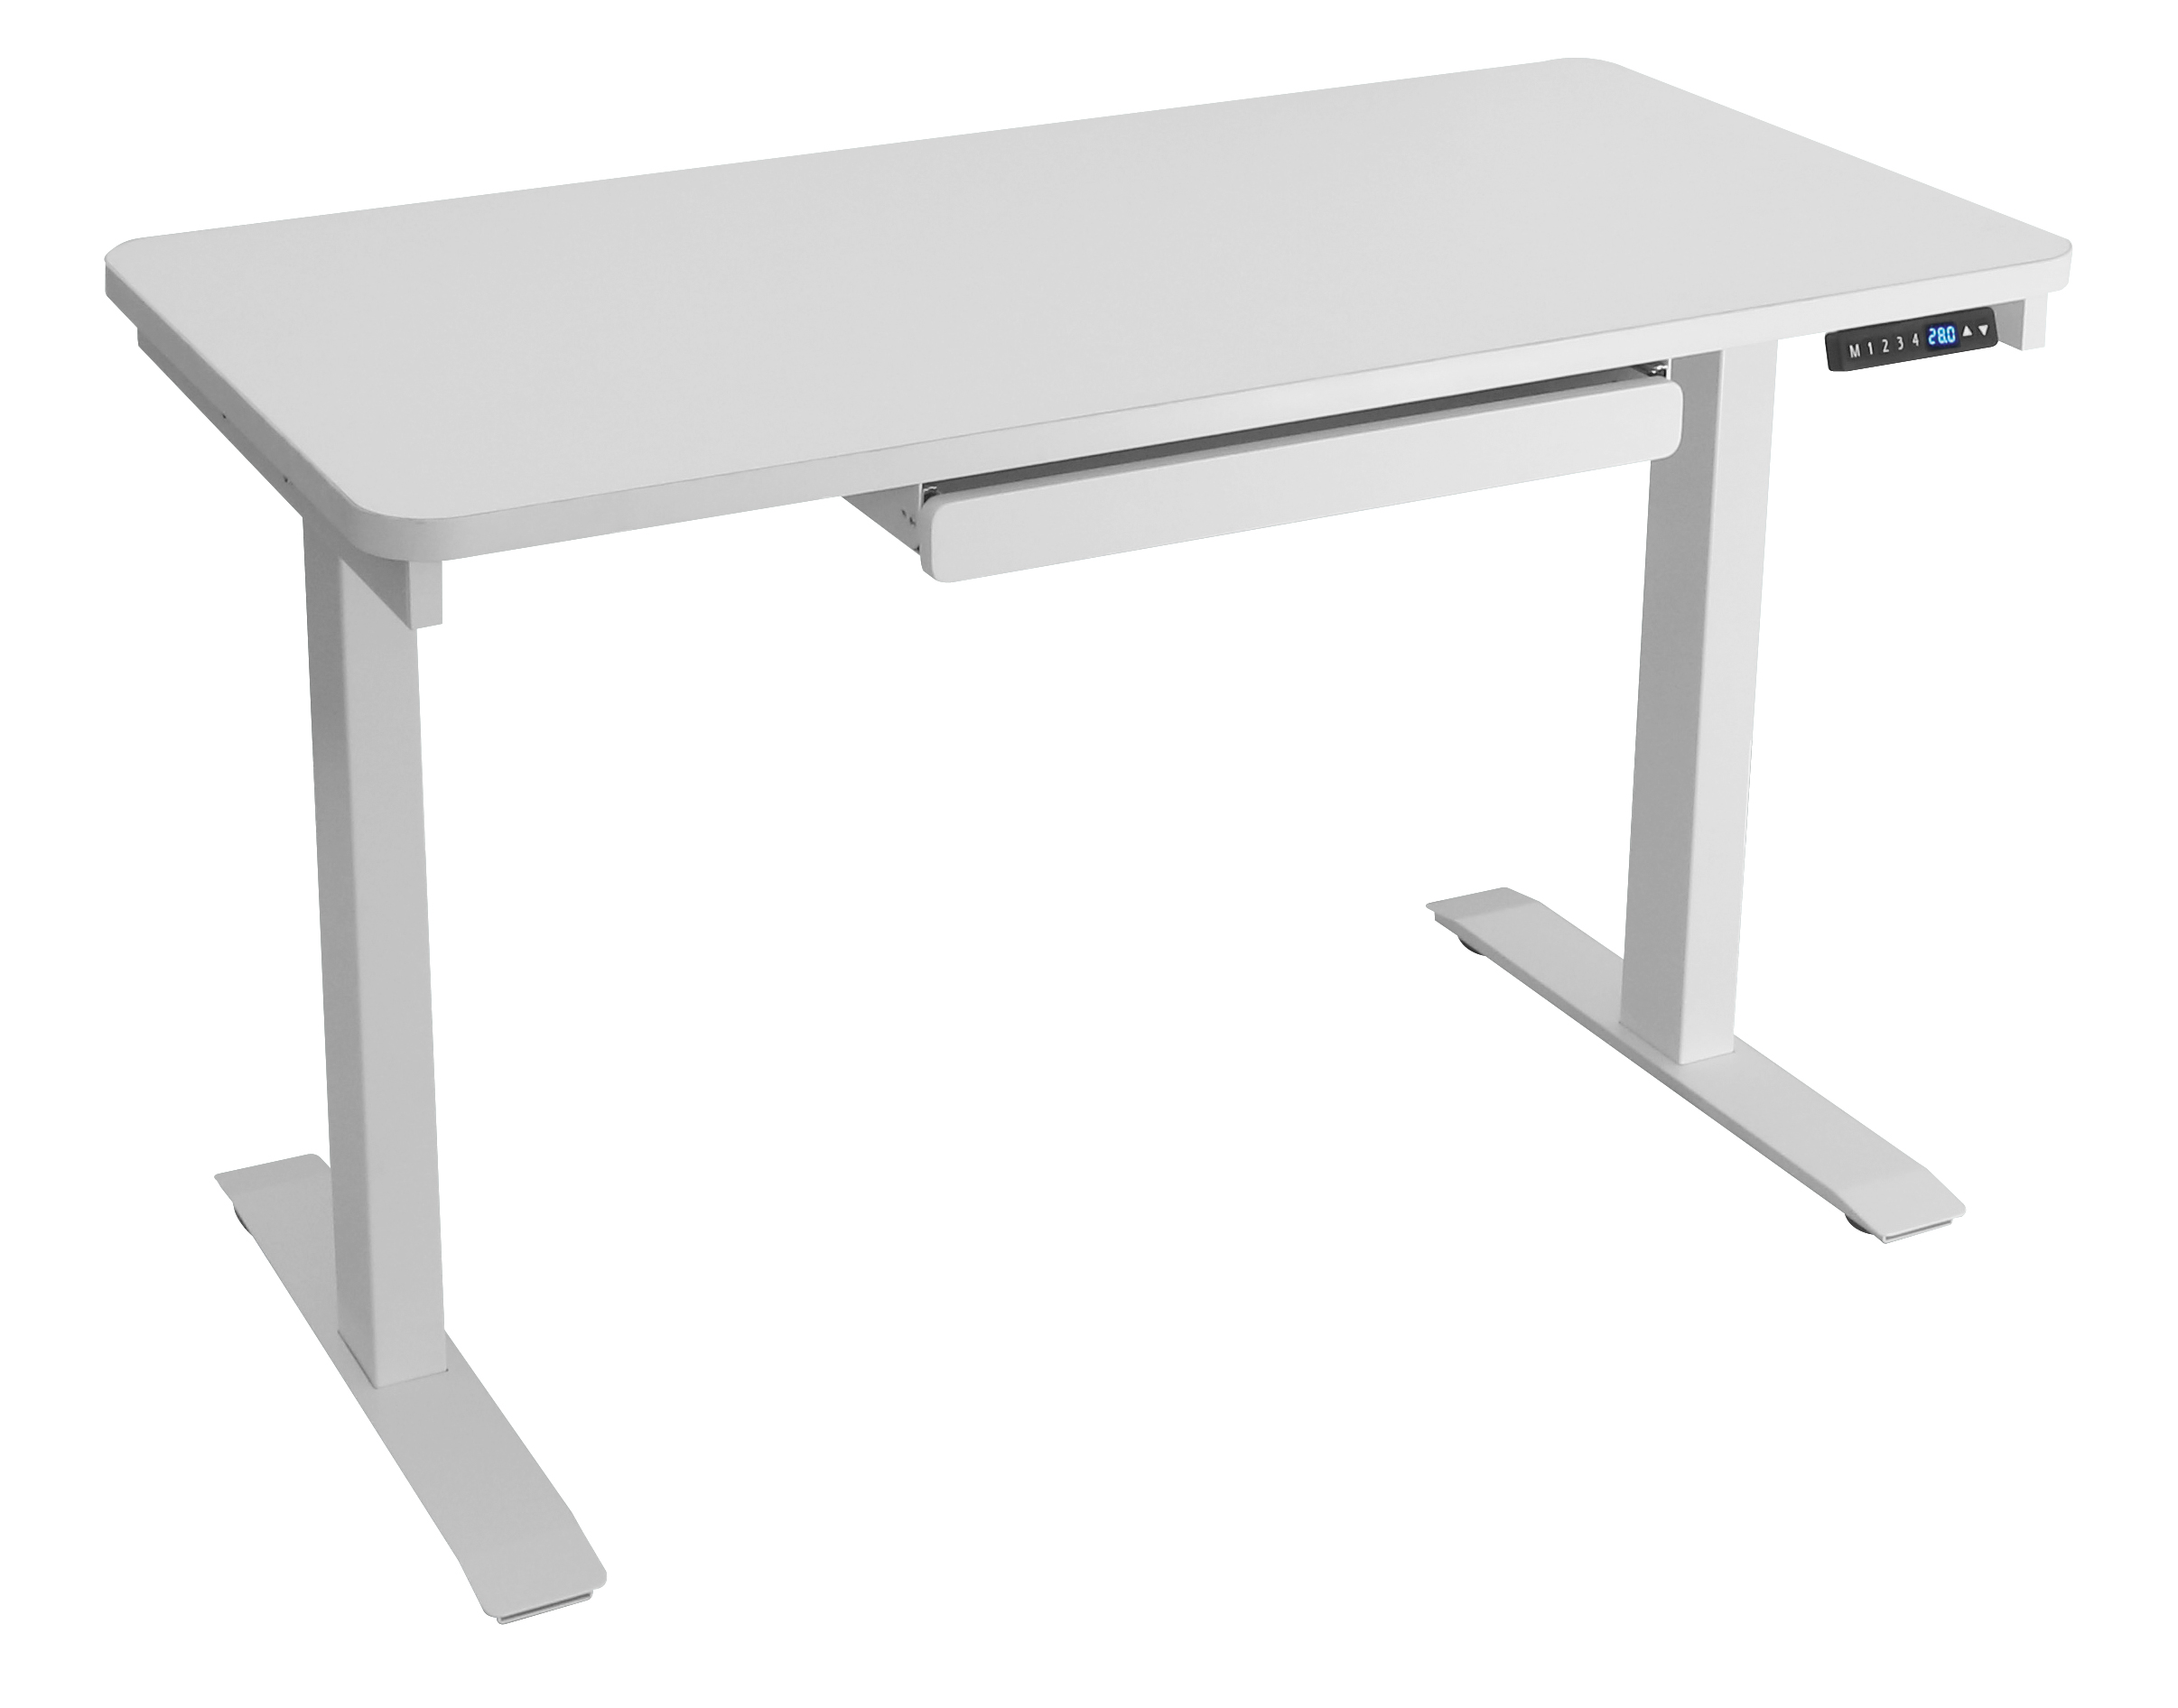 Motionwise White Electric Height Adjustable Standing Desk, 24”x48", Height Adjustable 28"-48" with 4 pre-set height adjustments and USB Charge Port, Multiple Colors - image 3 of 14